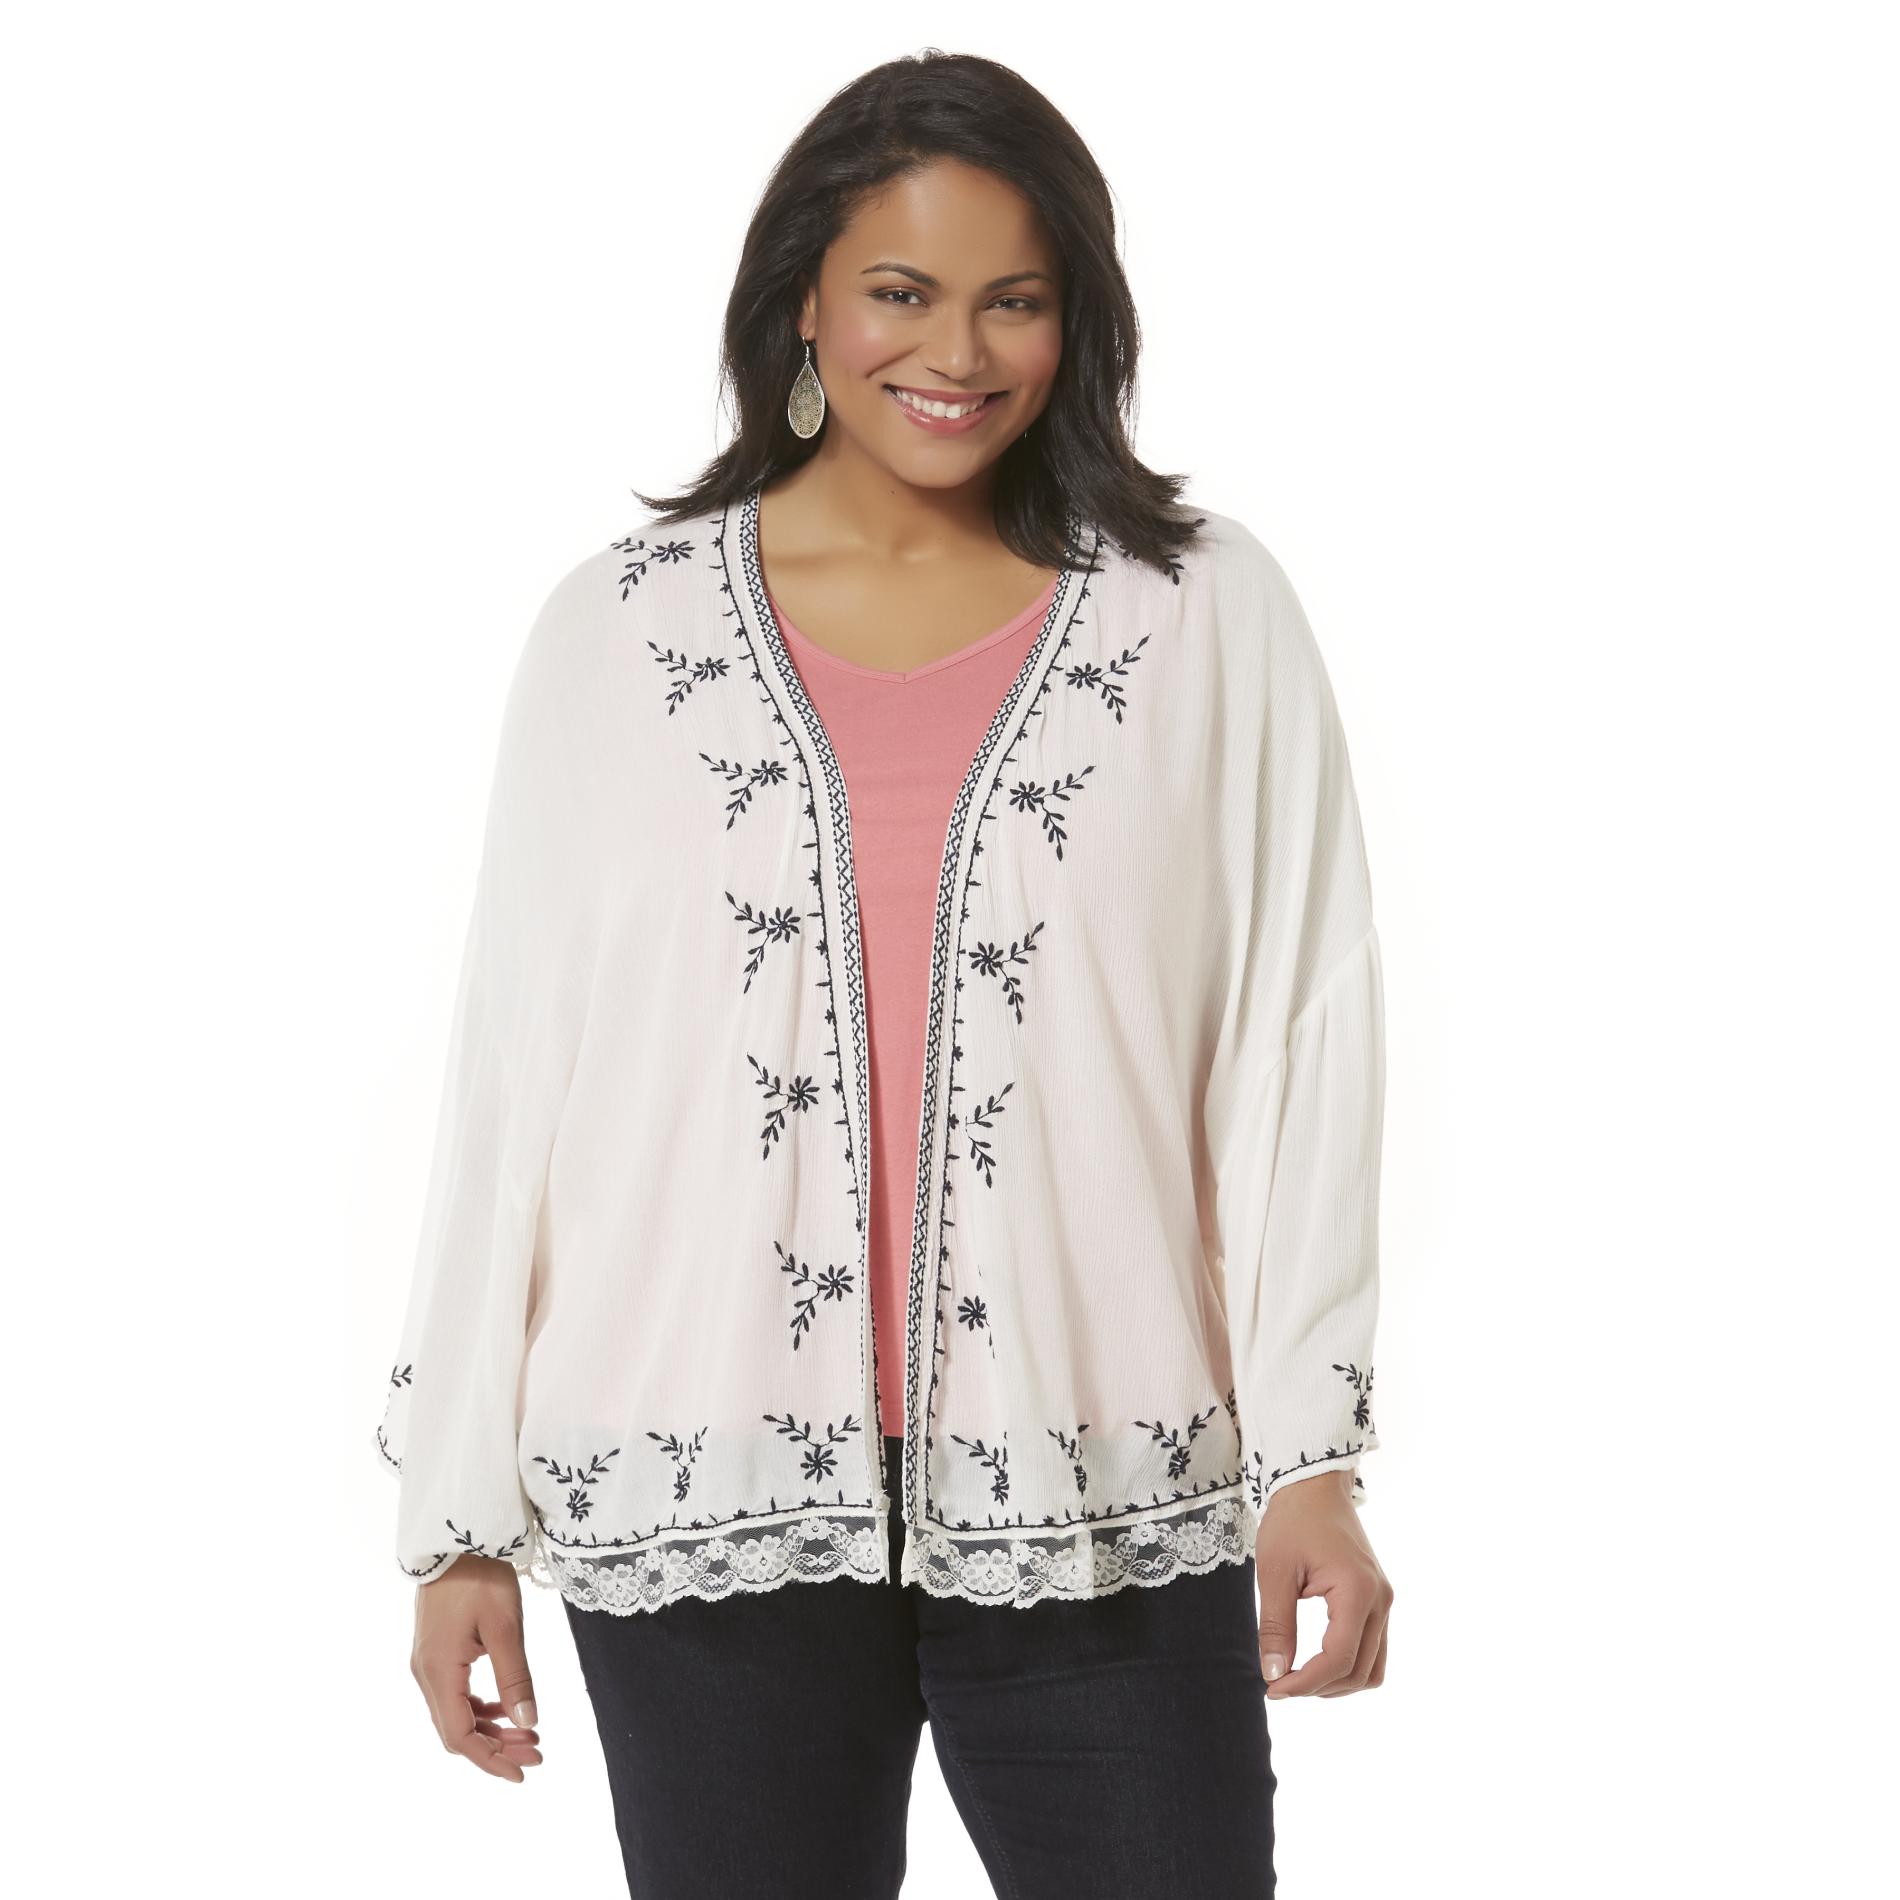 Simply Emma Women's Plus Embroidered Crepe Cardigan